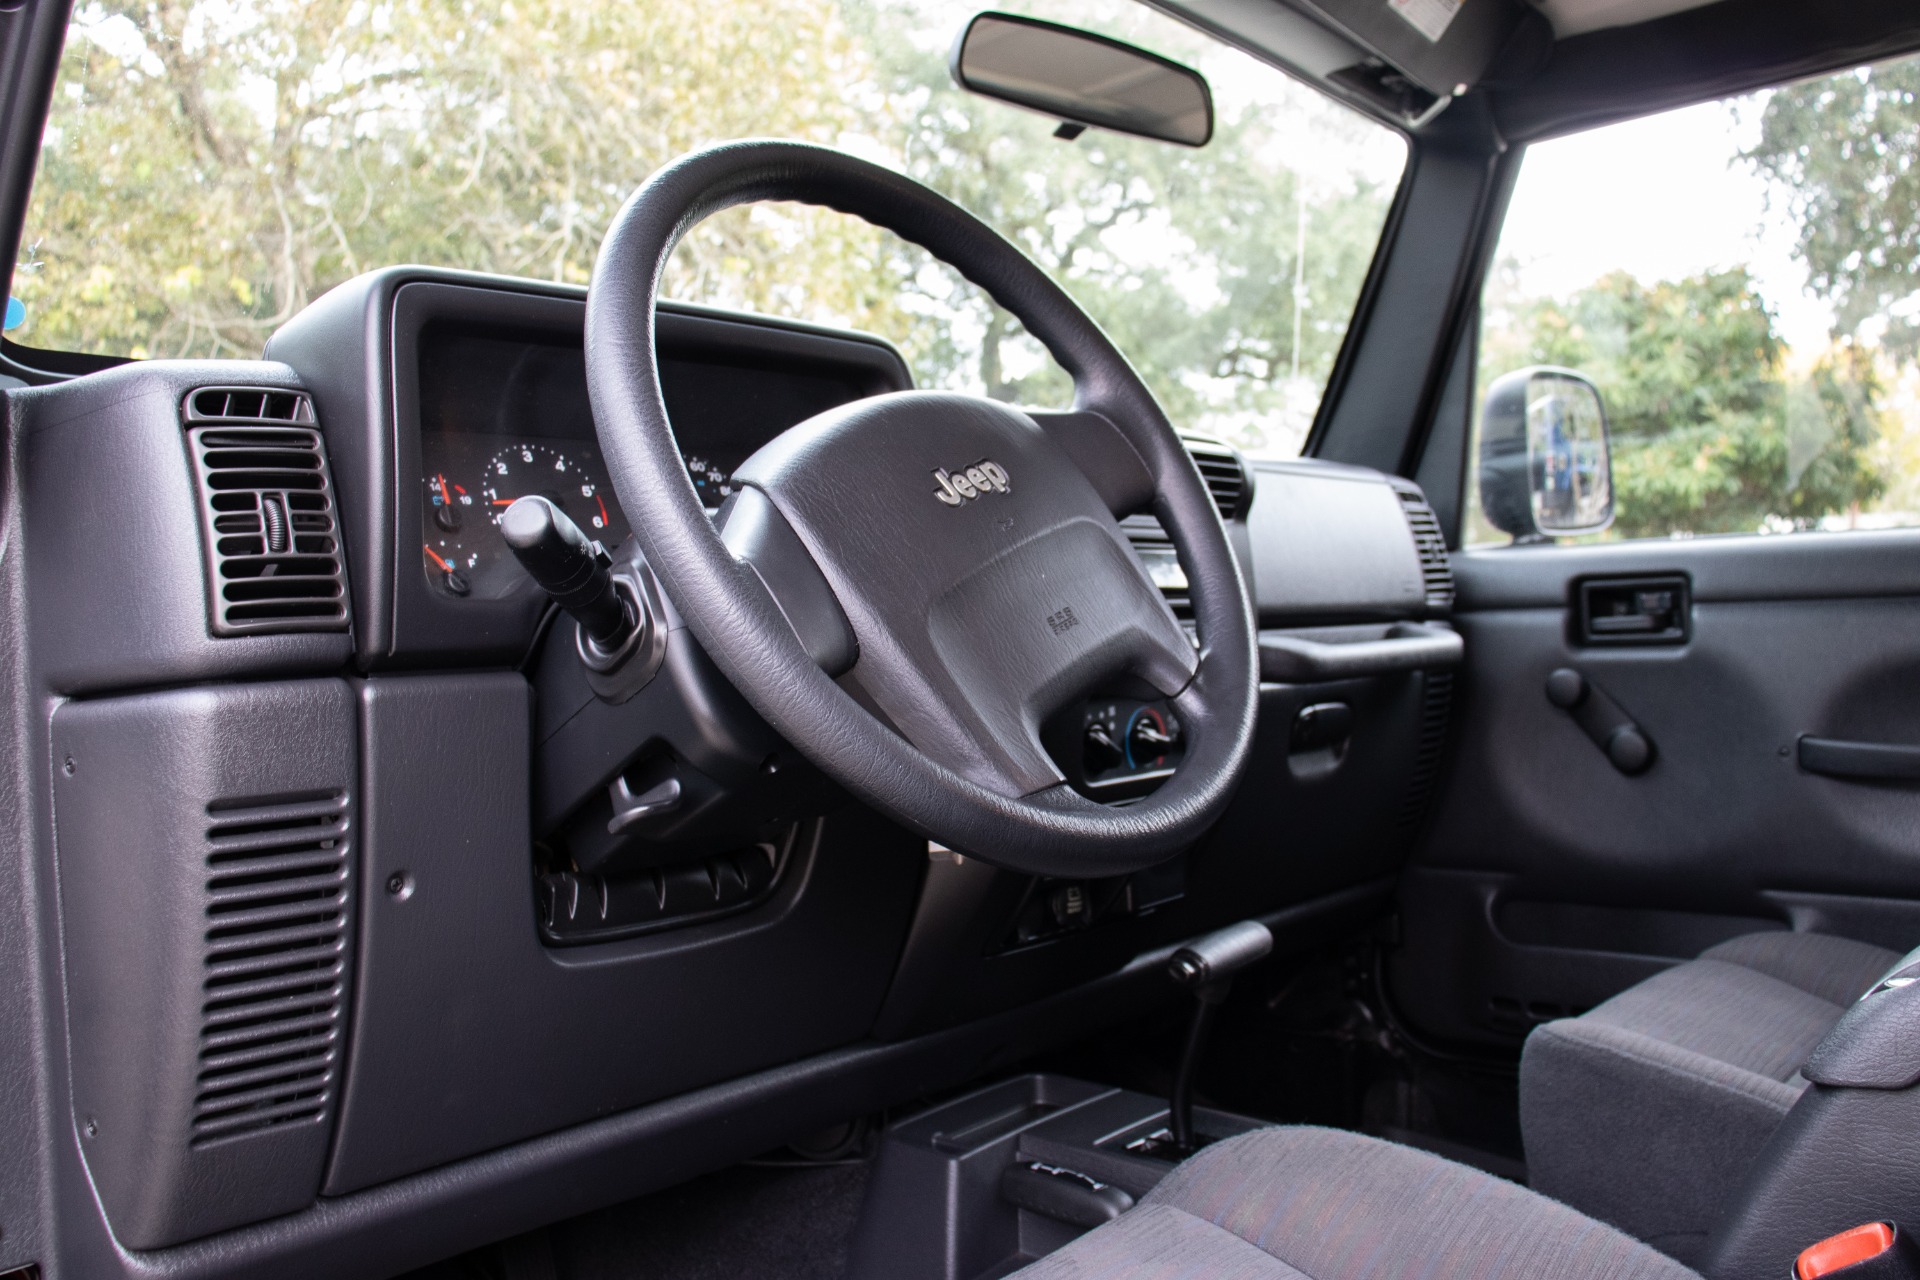 Used 2005 Jeep Wrangler X For Sale ($14,995) | Select Jeeps Inc. Stock  #371794